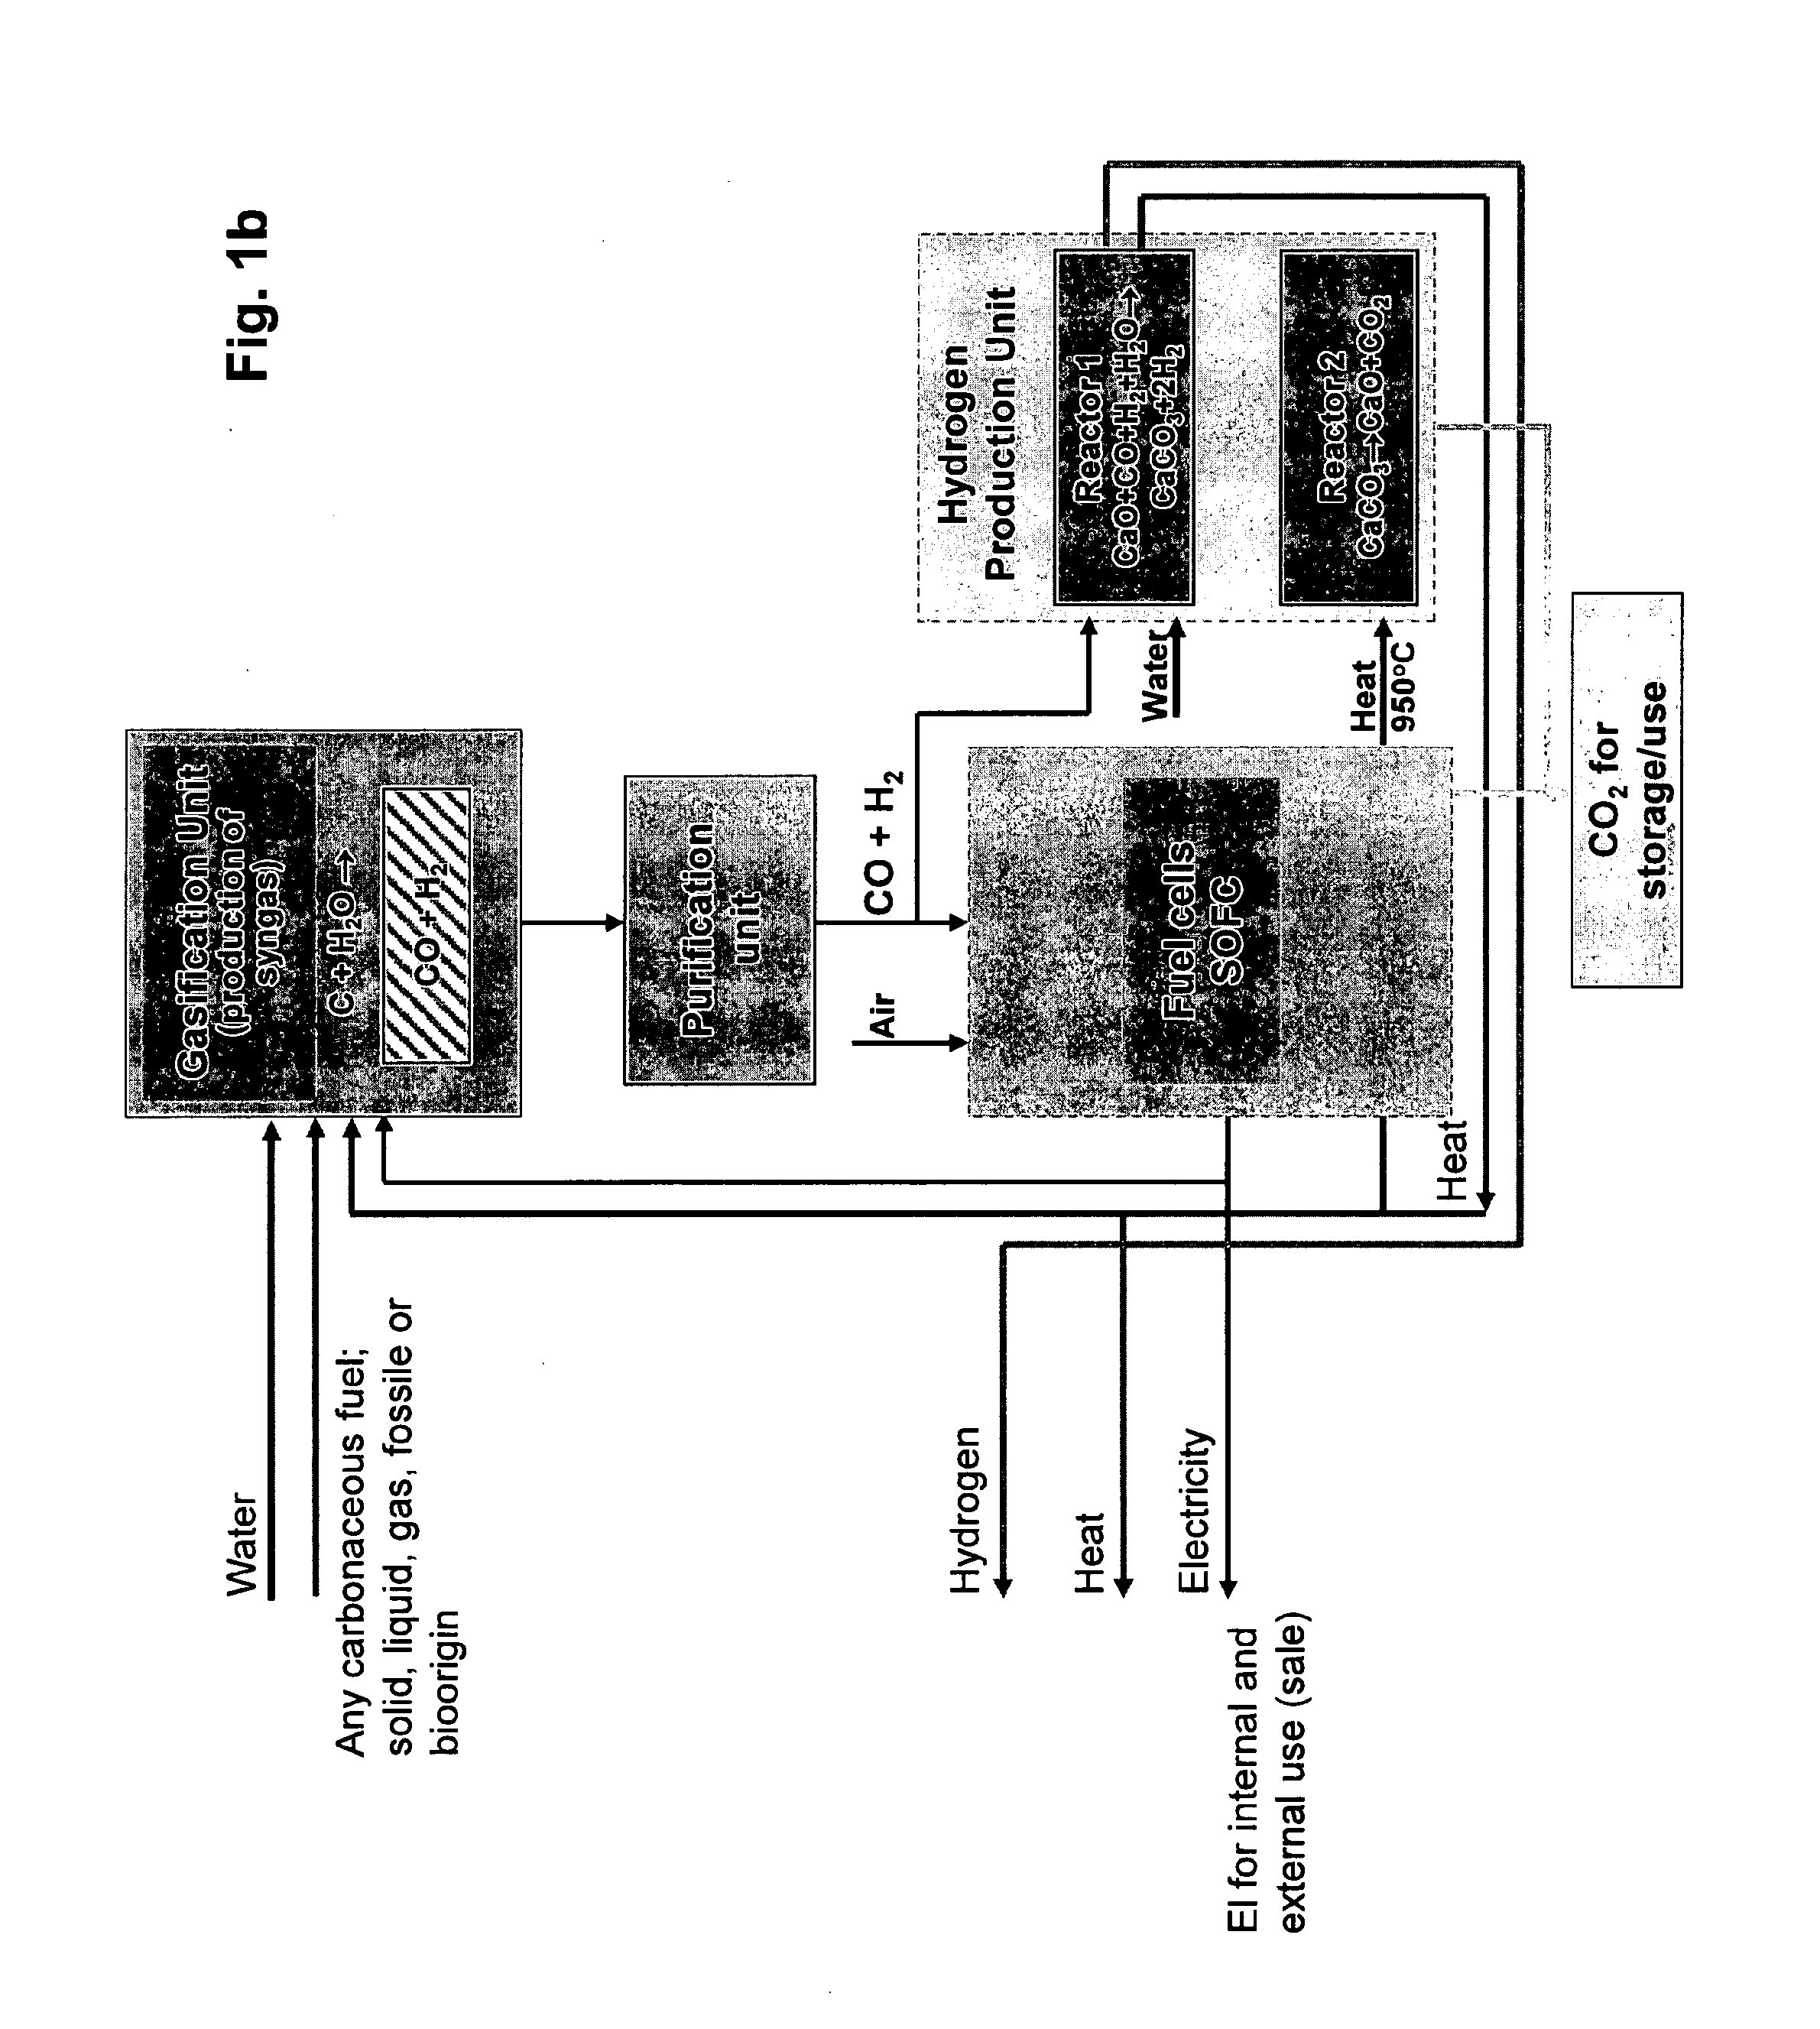 Method and device for simultaneous production of energy in the forms electricity, heat and hydrogen gas